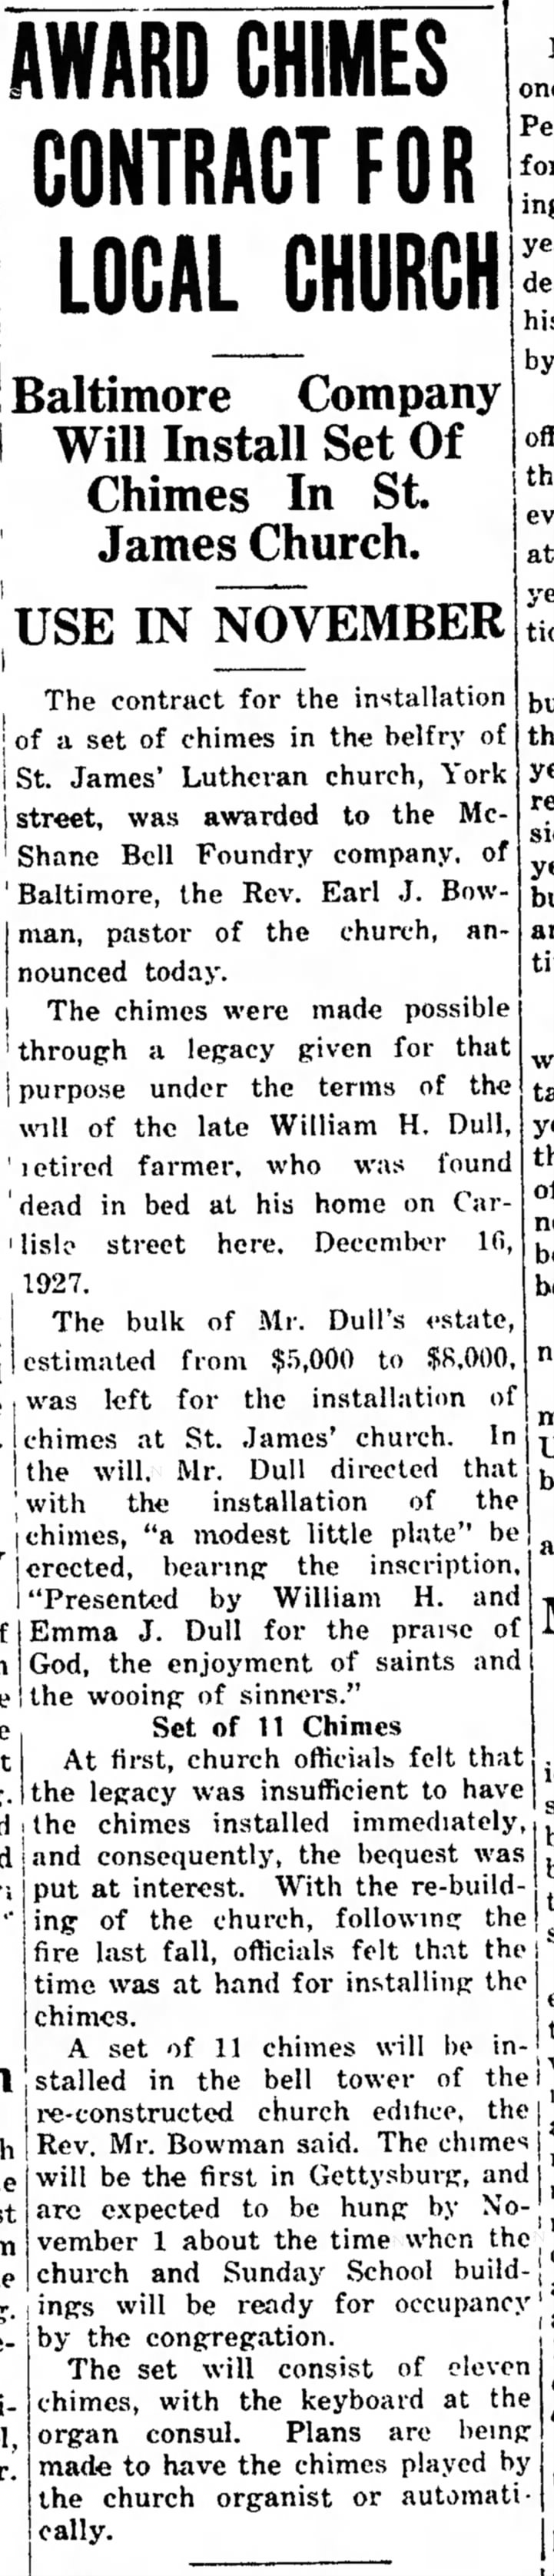 Chime contract for St.James' Lutheran church, York street